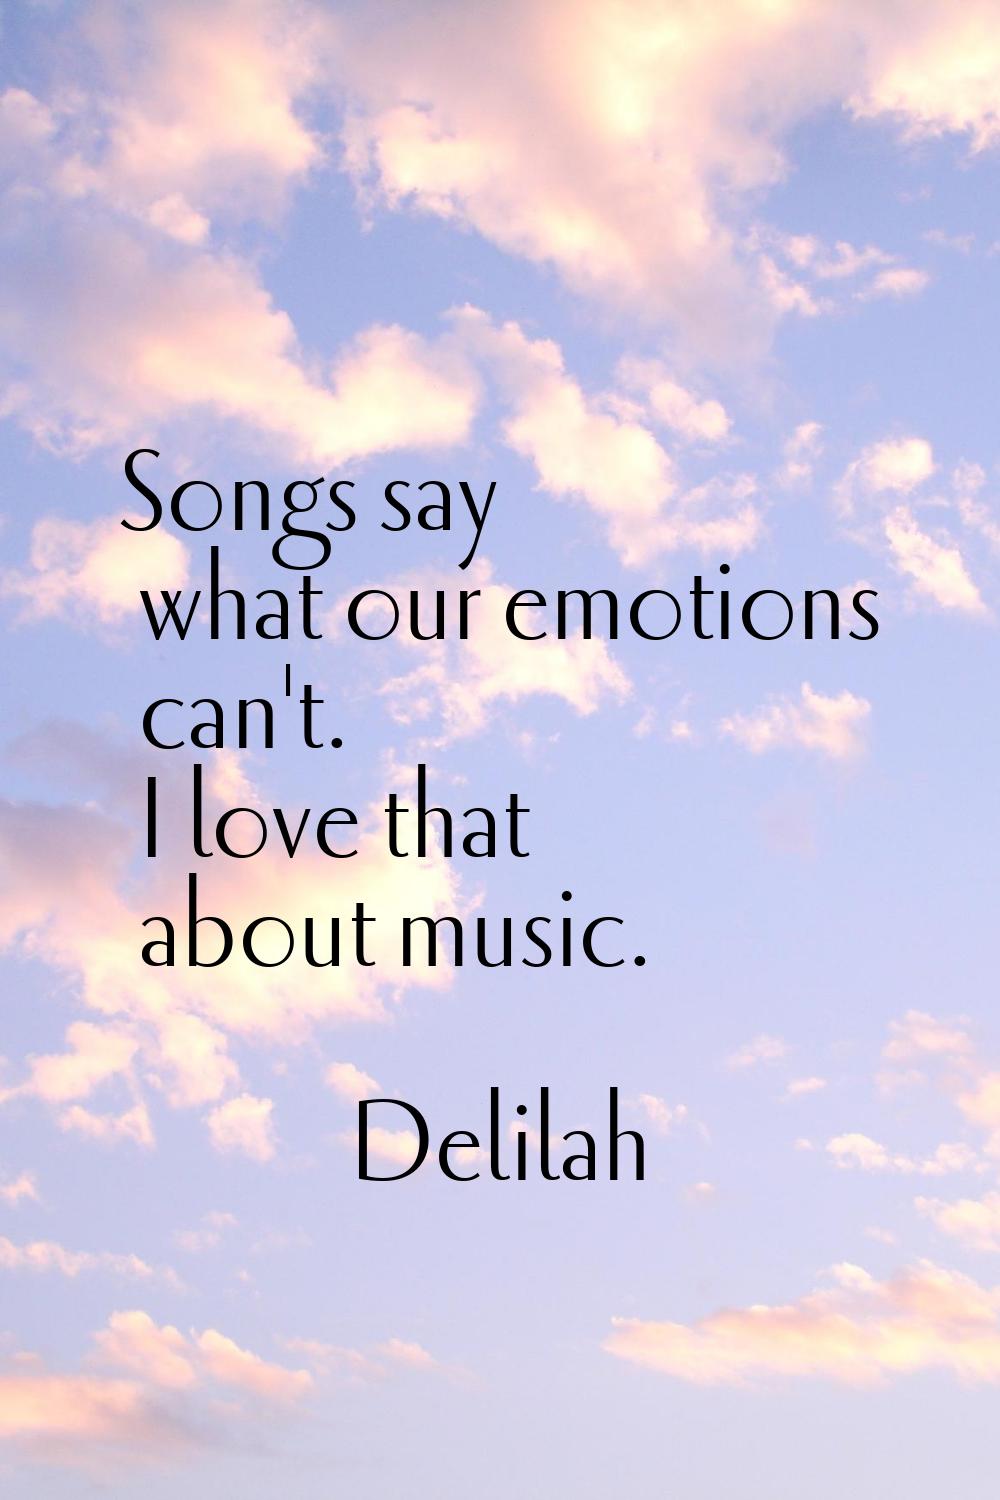 Songs say what our emotions can't. I love that about music.